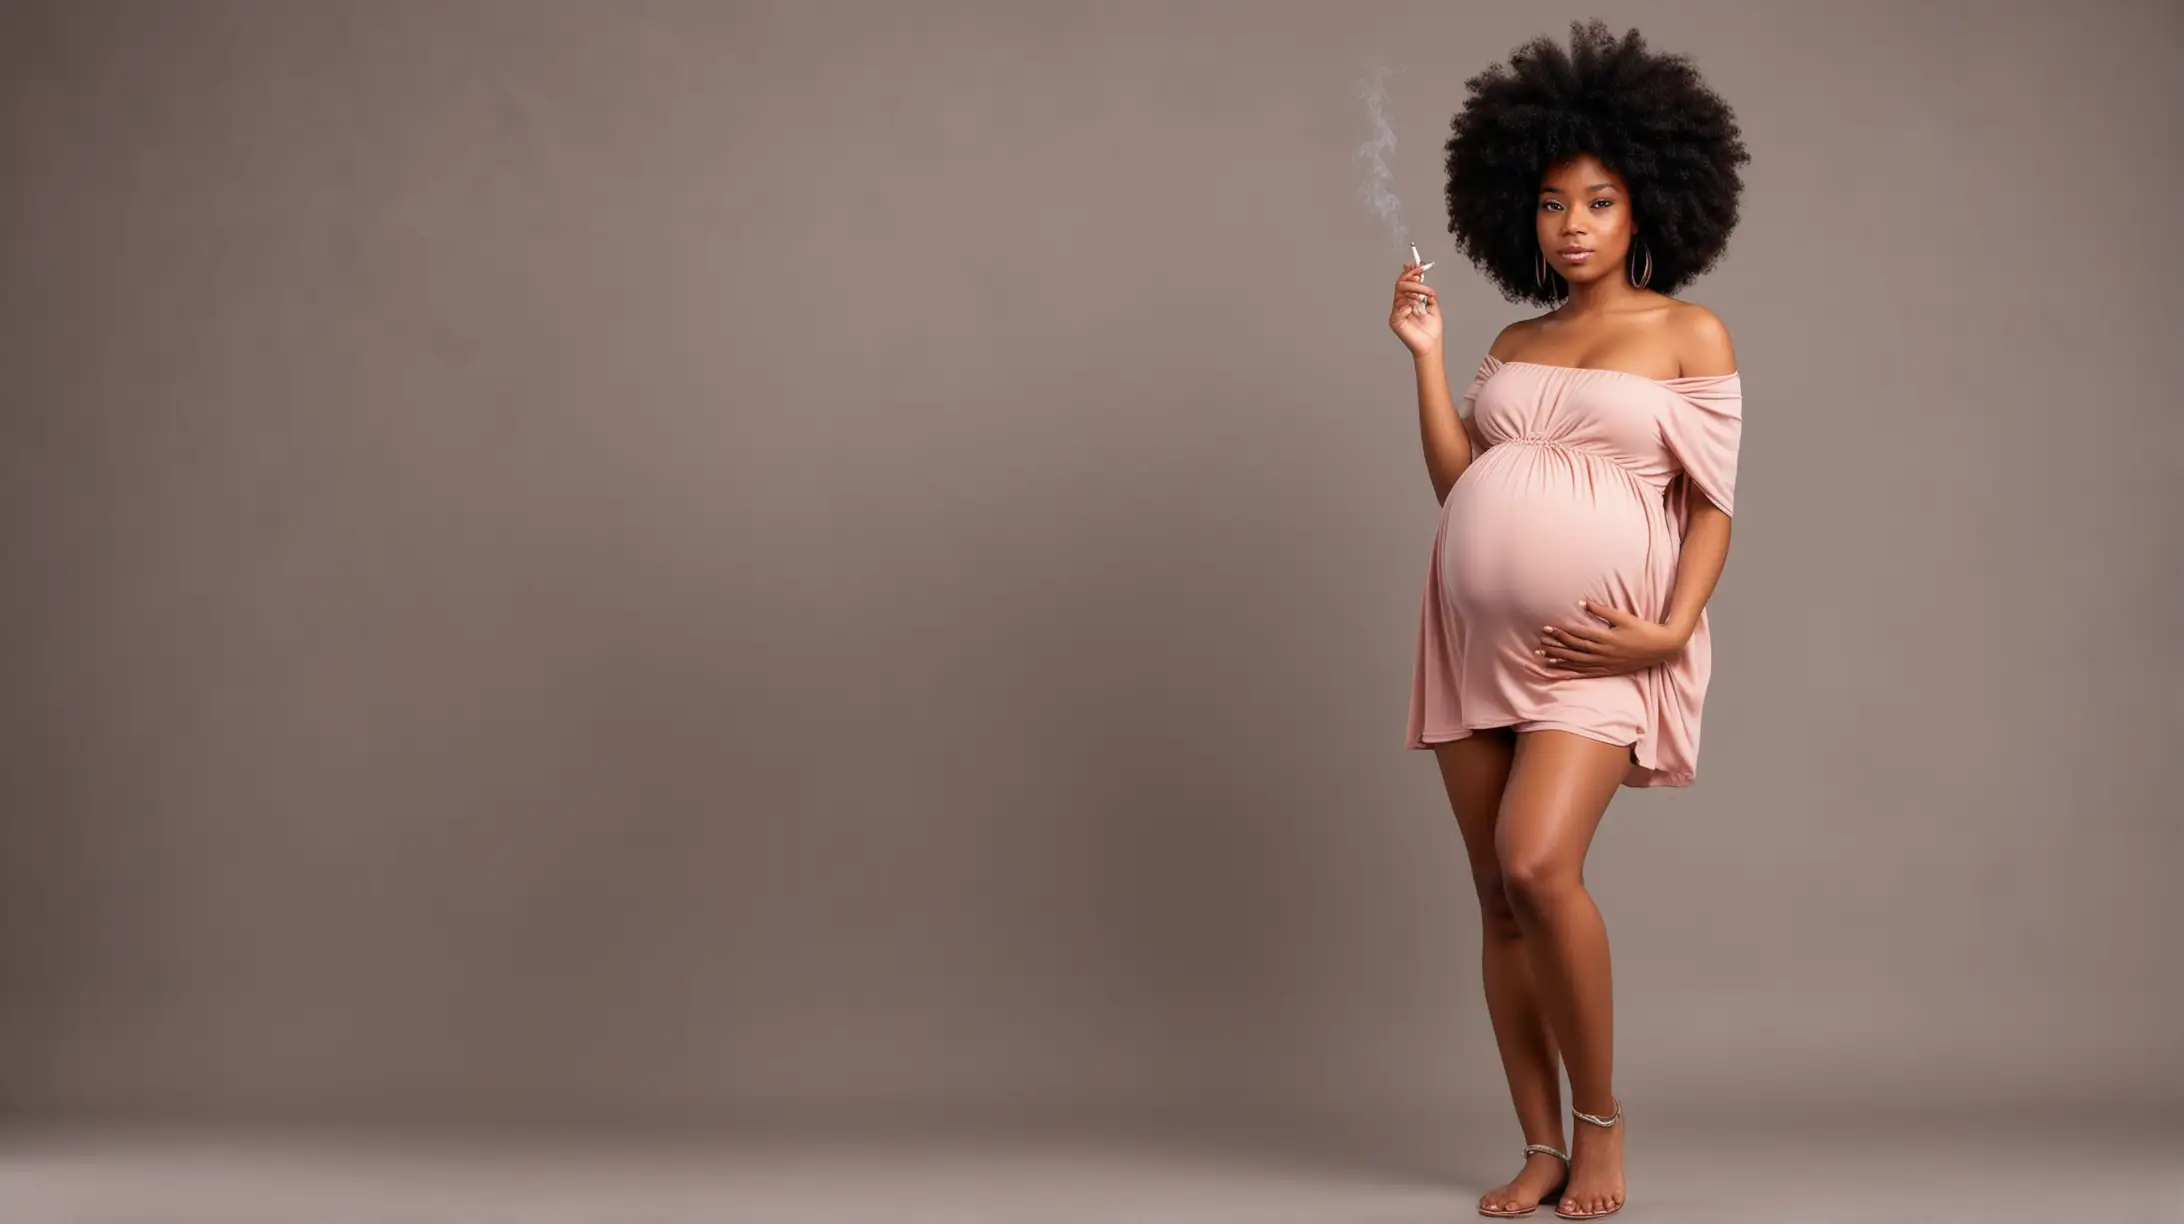 Beautiful Pregnant Black Woman Smoking Cigarette with Afro Hair